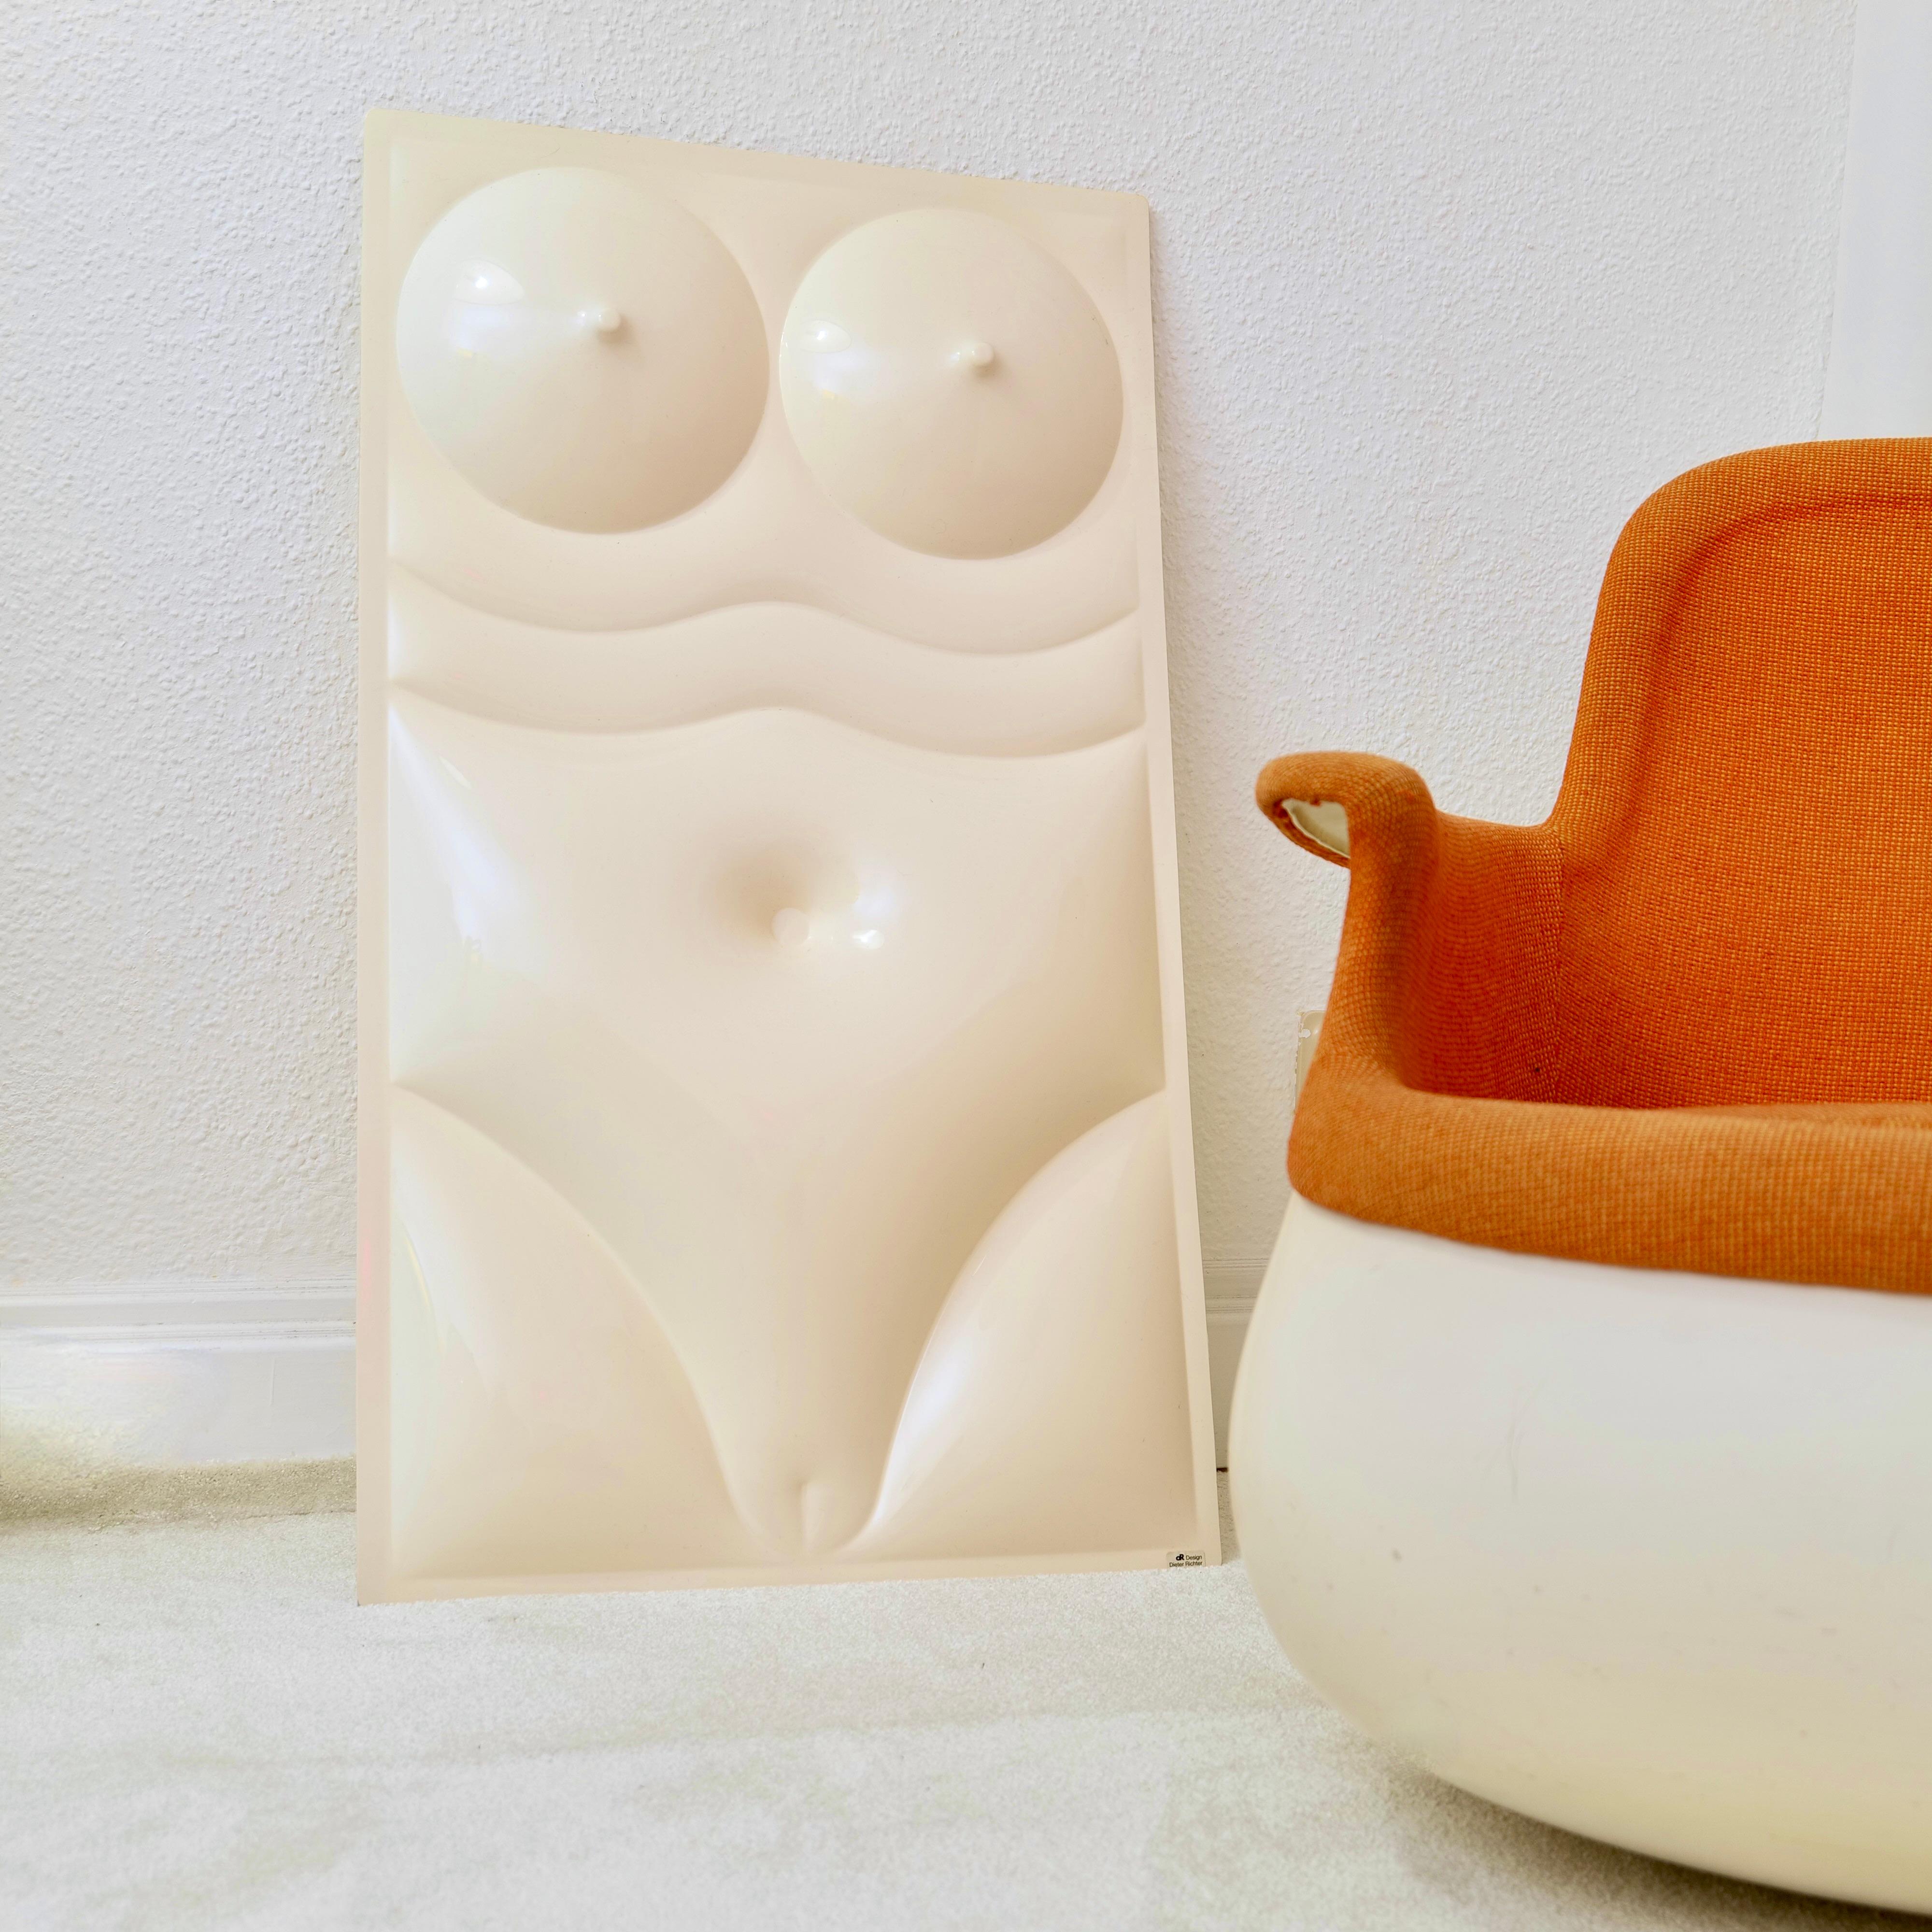 German Dieter Richter Design - space age wall Art nude body  - 1970s For Sale